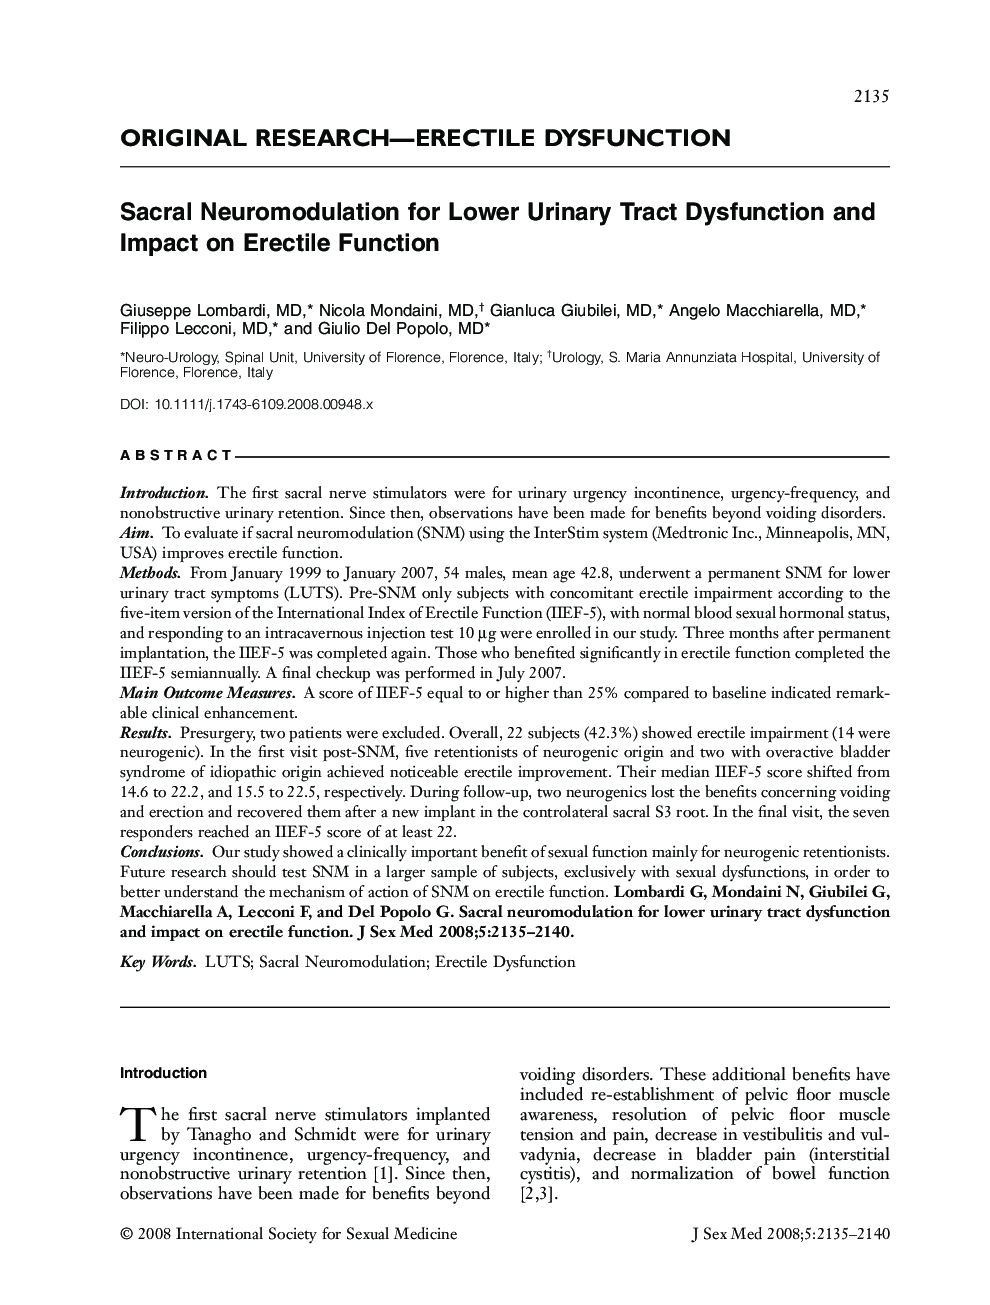 Sacral Neuromodulation for Lower Urinary Tract Dysfunction and Impact on Erectile Function